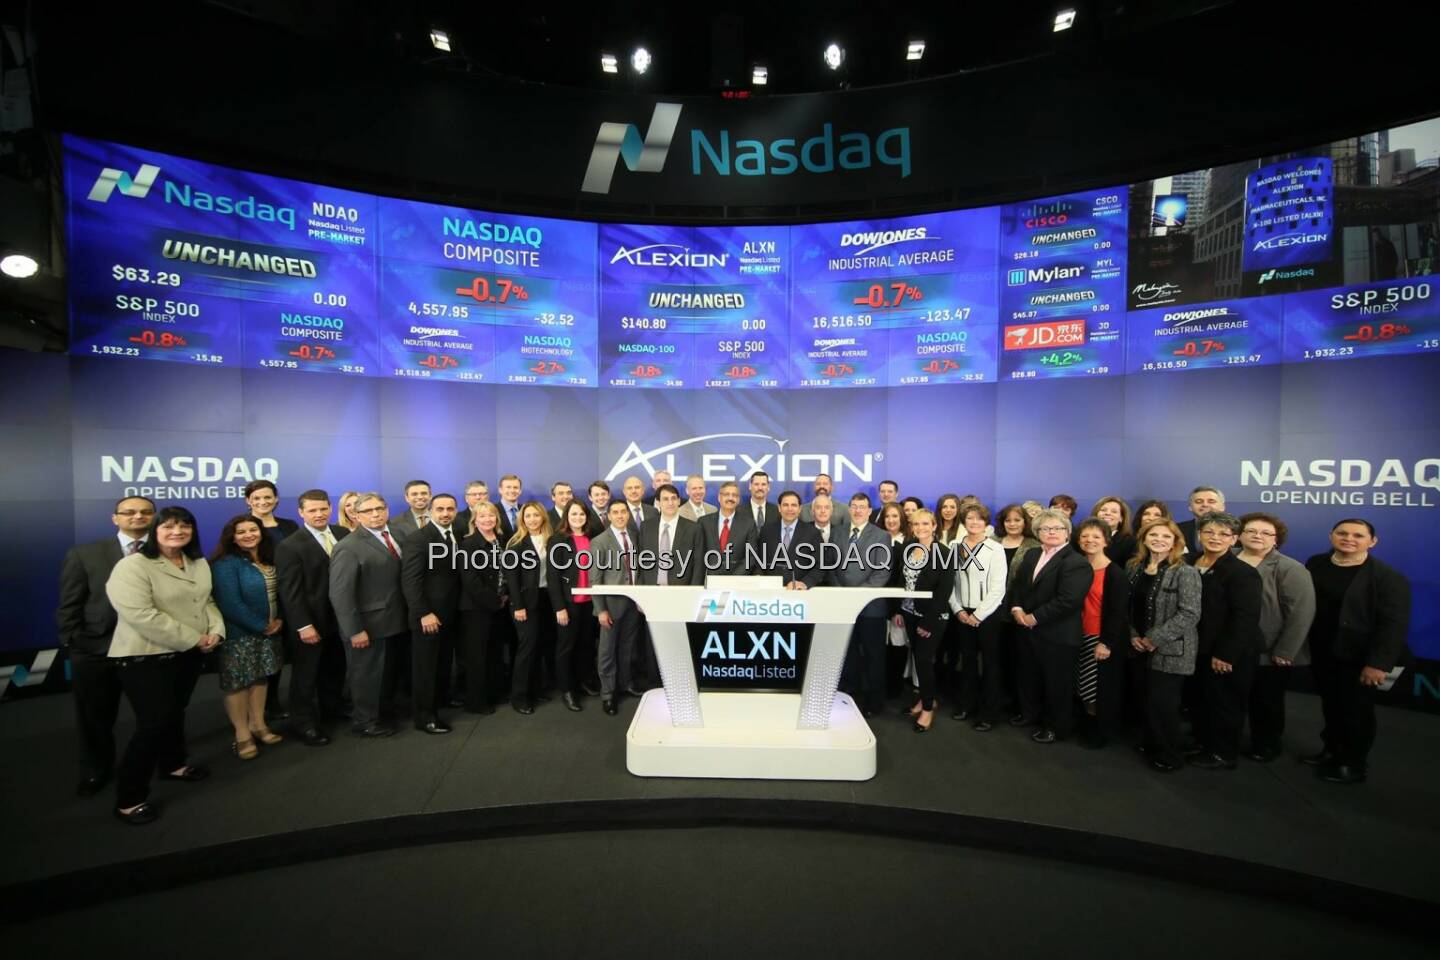 Alexion showing up in large numbers here for today's #Nasdaq opening bell! $ALXN #squadgoals  Source: http://facebook.com/NASDAQ